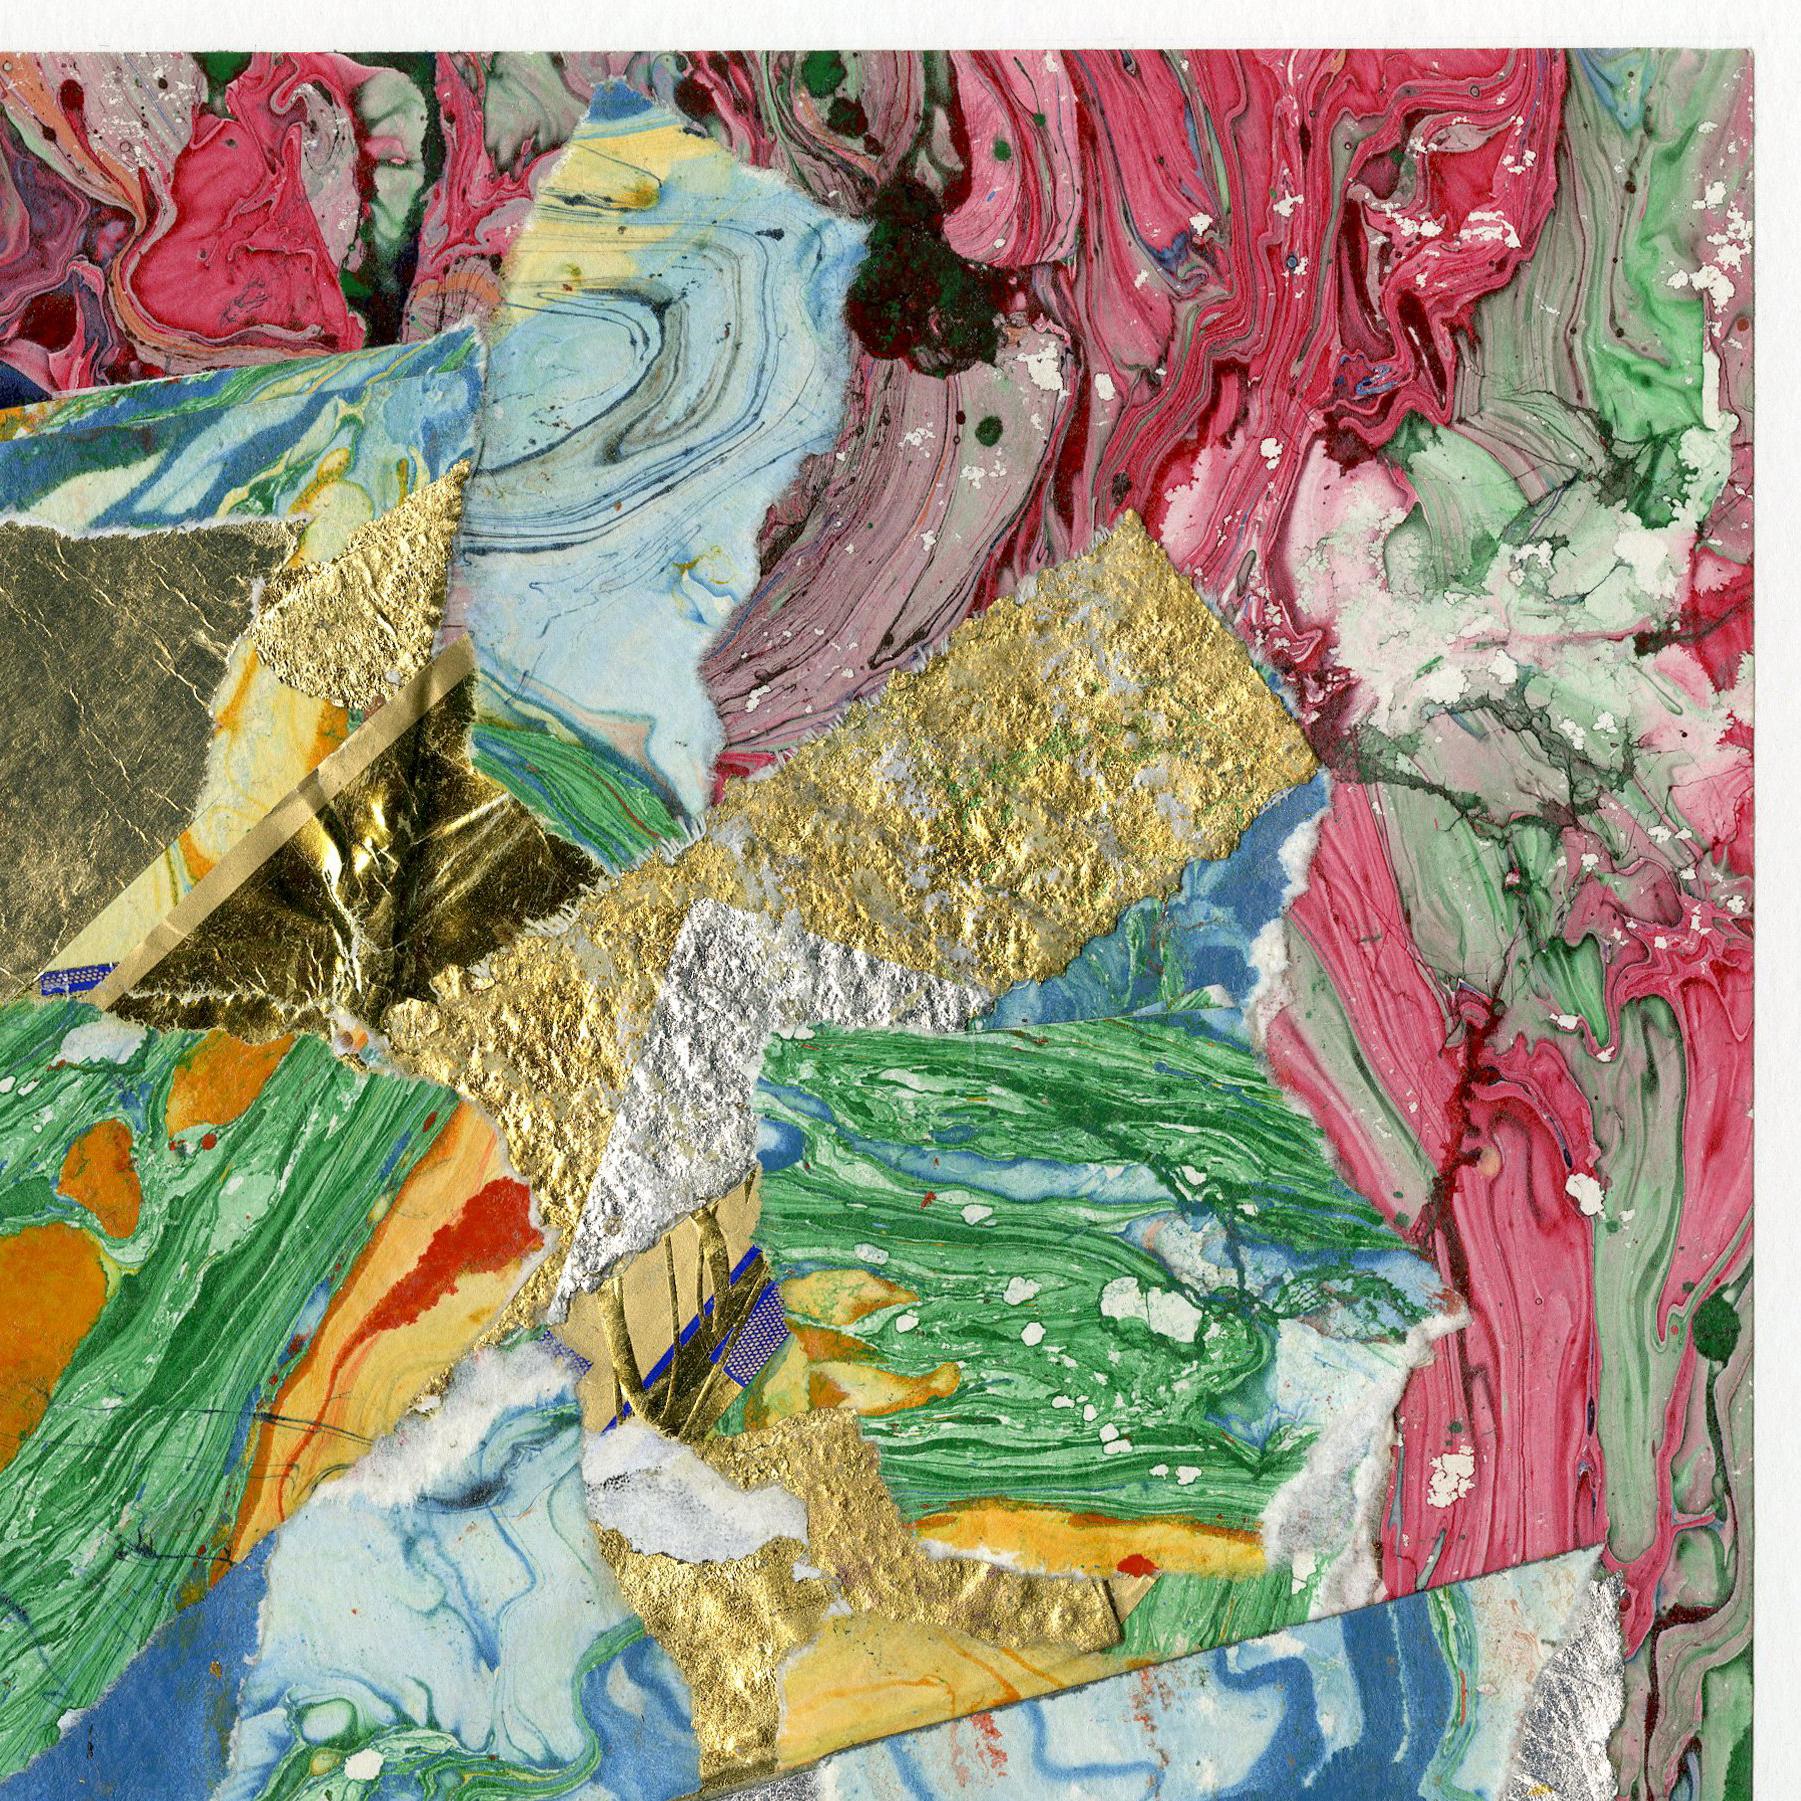 Untitled
Collage made of foil, golf leaf and marbled book papers, c. 2004 
Unsigned, from the Estate of the artist.
Image size: 8 5/8 x 10 inches
Sheet size:  14 x 17 inches
Peter Marks (1935 -2010)

Peter Marks was born in New York City on January